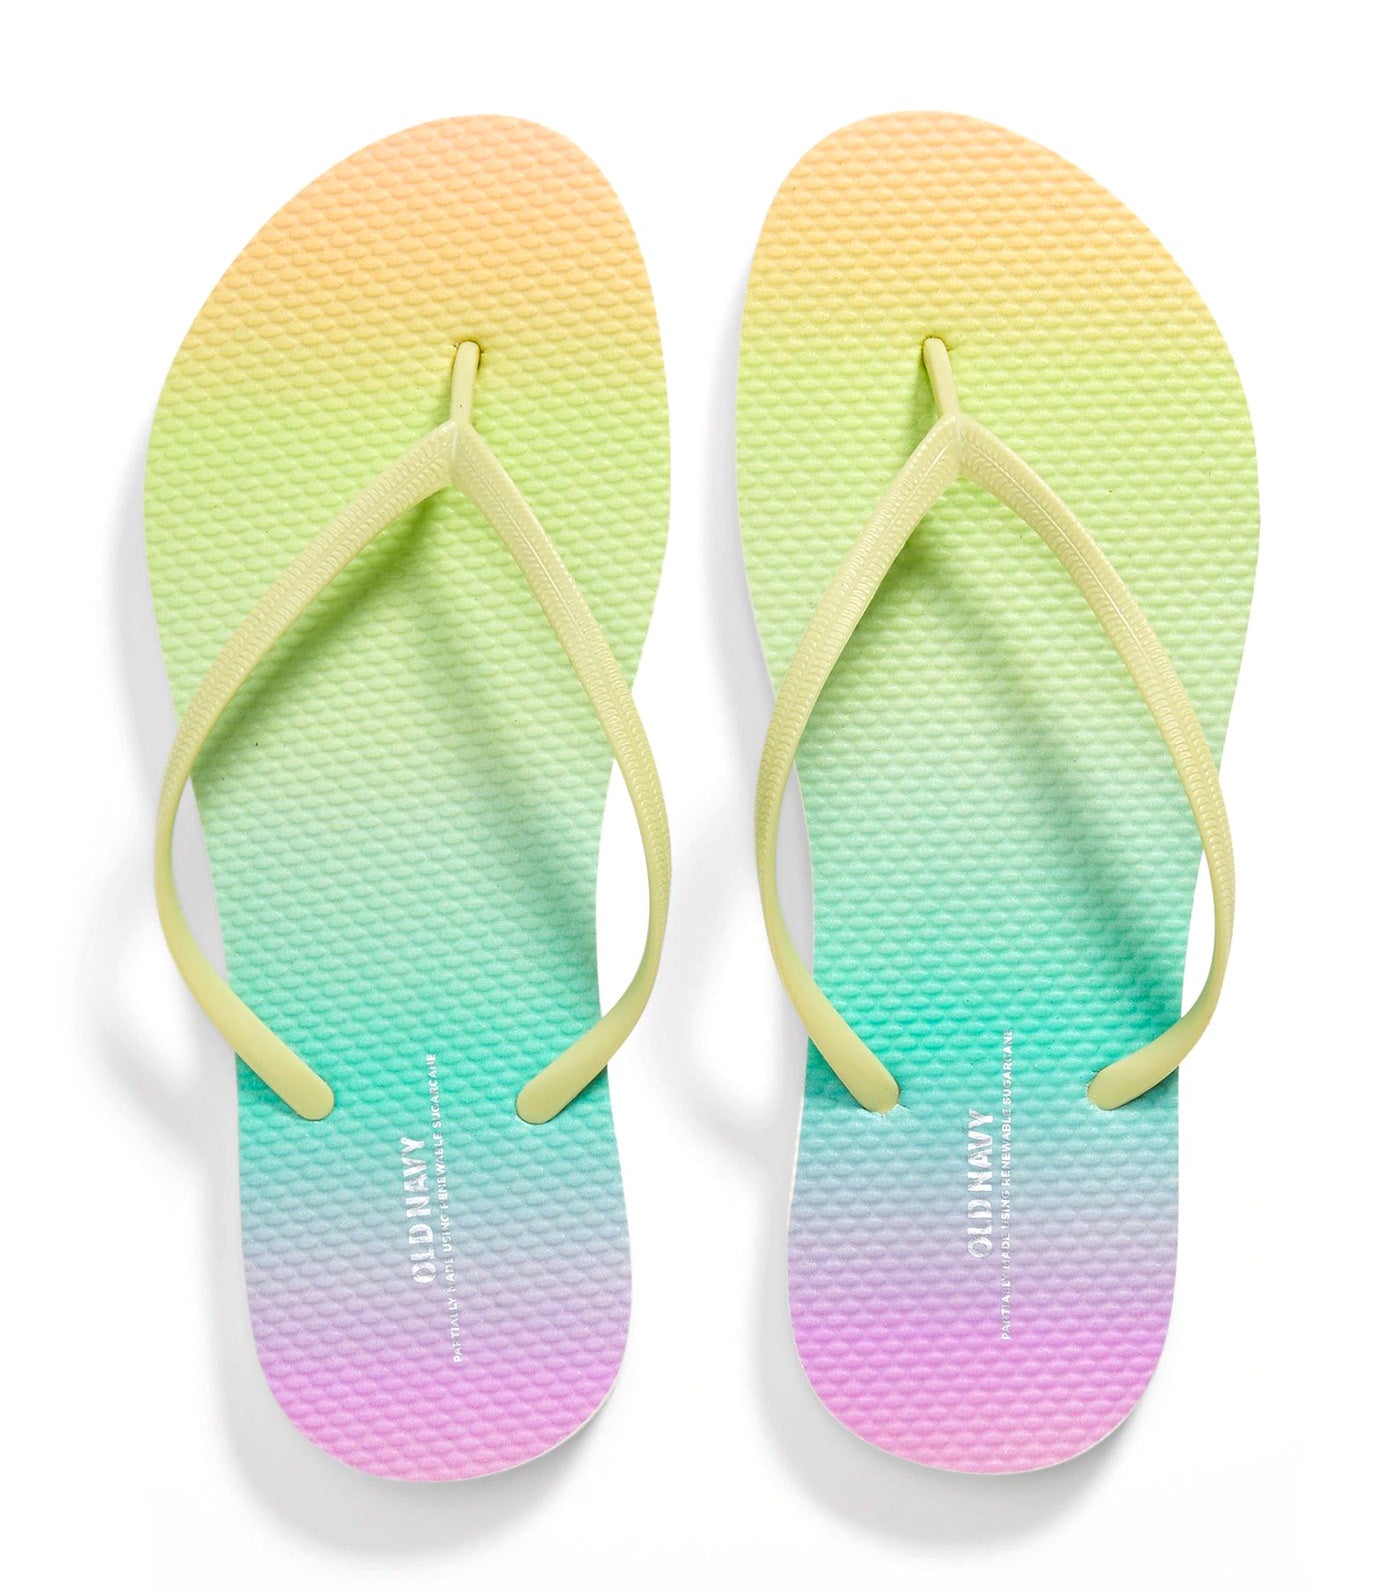 Flip-Flop Sandals for Women (Partially Plant-Based) Cool Gradient